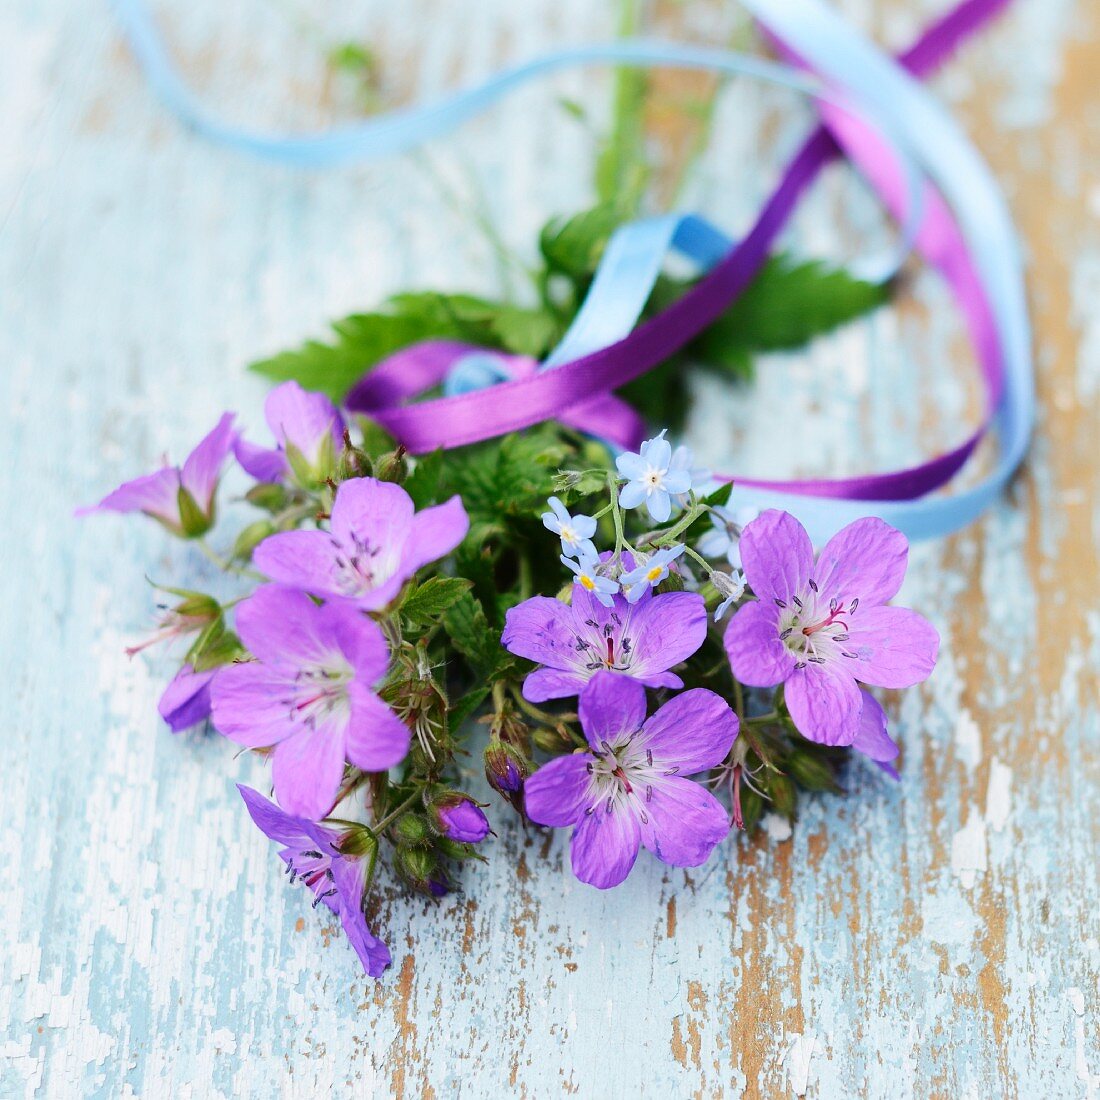 Purple flowers (cranesbill and forget-me-not) tied with ribbons on vintage wooden board